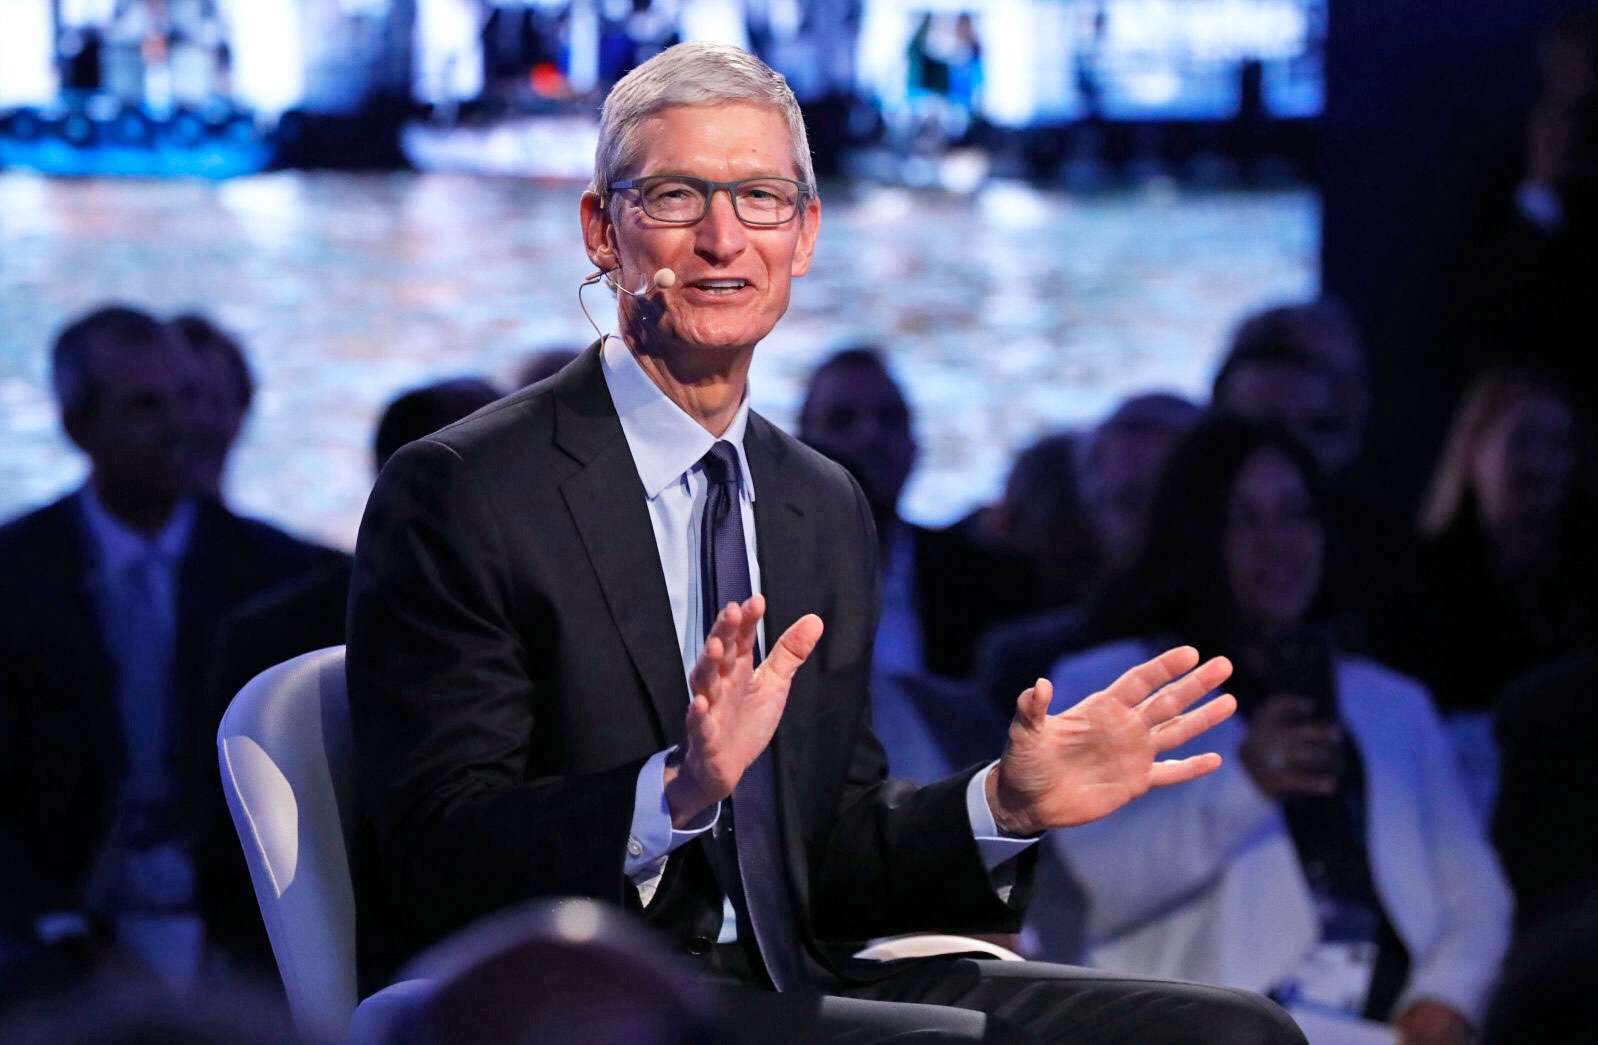 MSNBC’s interview with Apple CEO Tim Cook will be airing tonight at 8PM ET